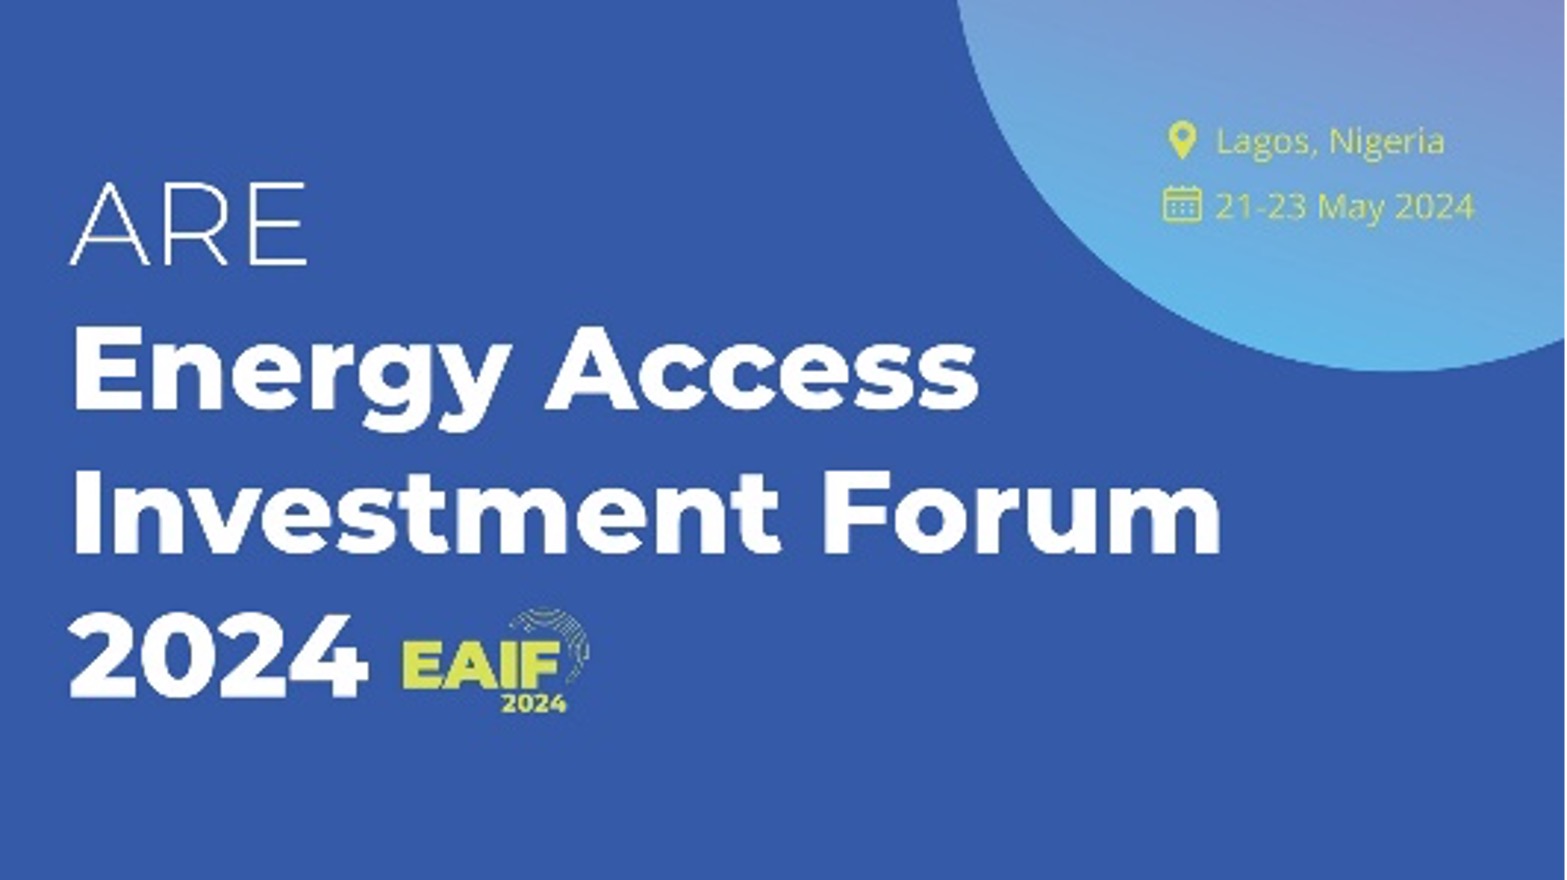 ARE Energy Access Investment Forum 2024